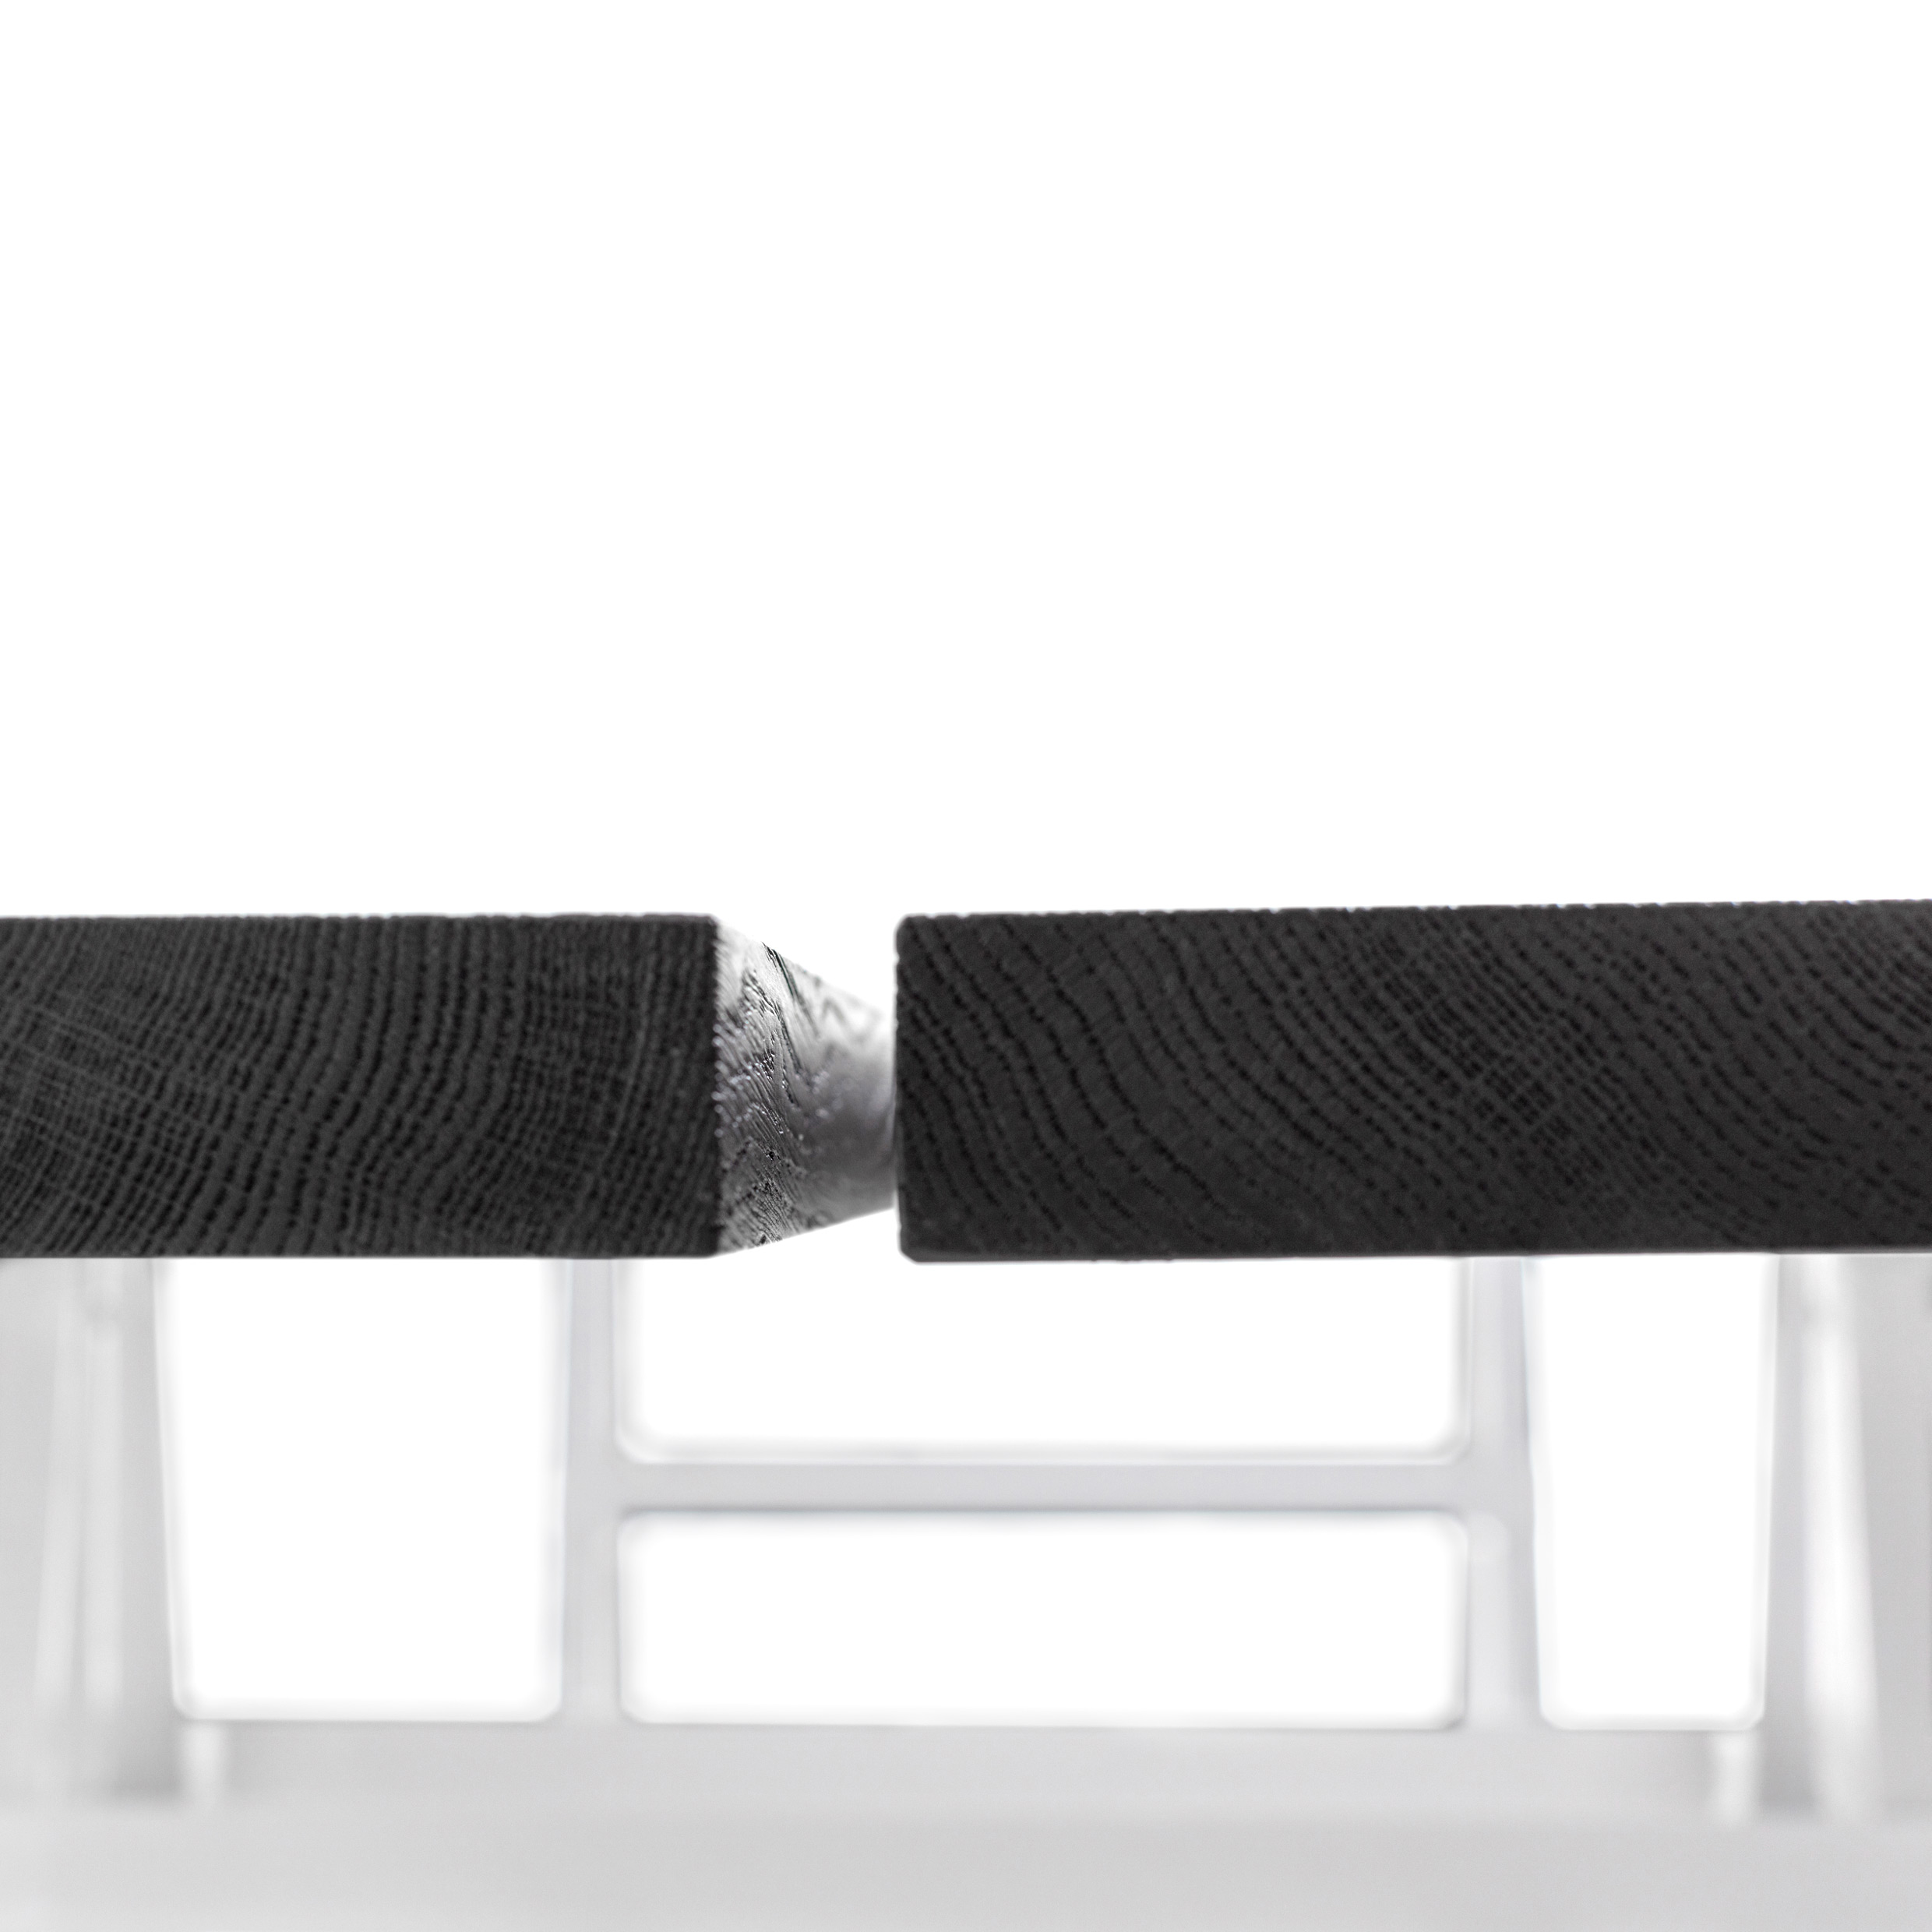 FORM EXCLUSIVE // JOON - IN-/OUTDOOR TABLE | BLACK CARED - 220CM X 45CM X 5CM - PAINT MONKEY WHITE